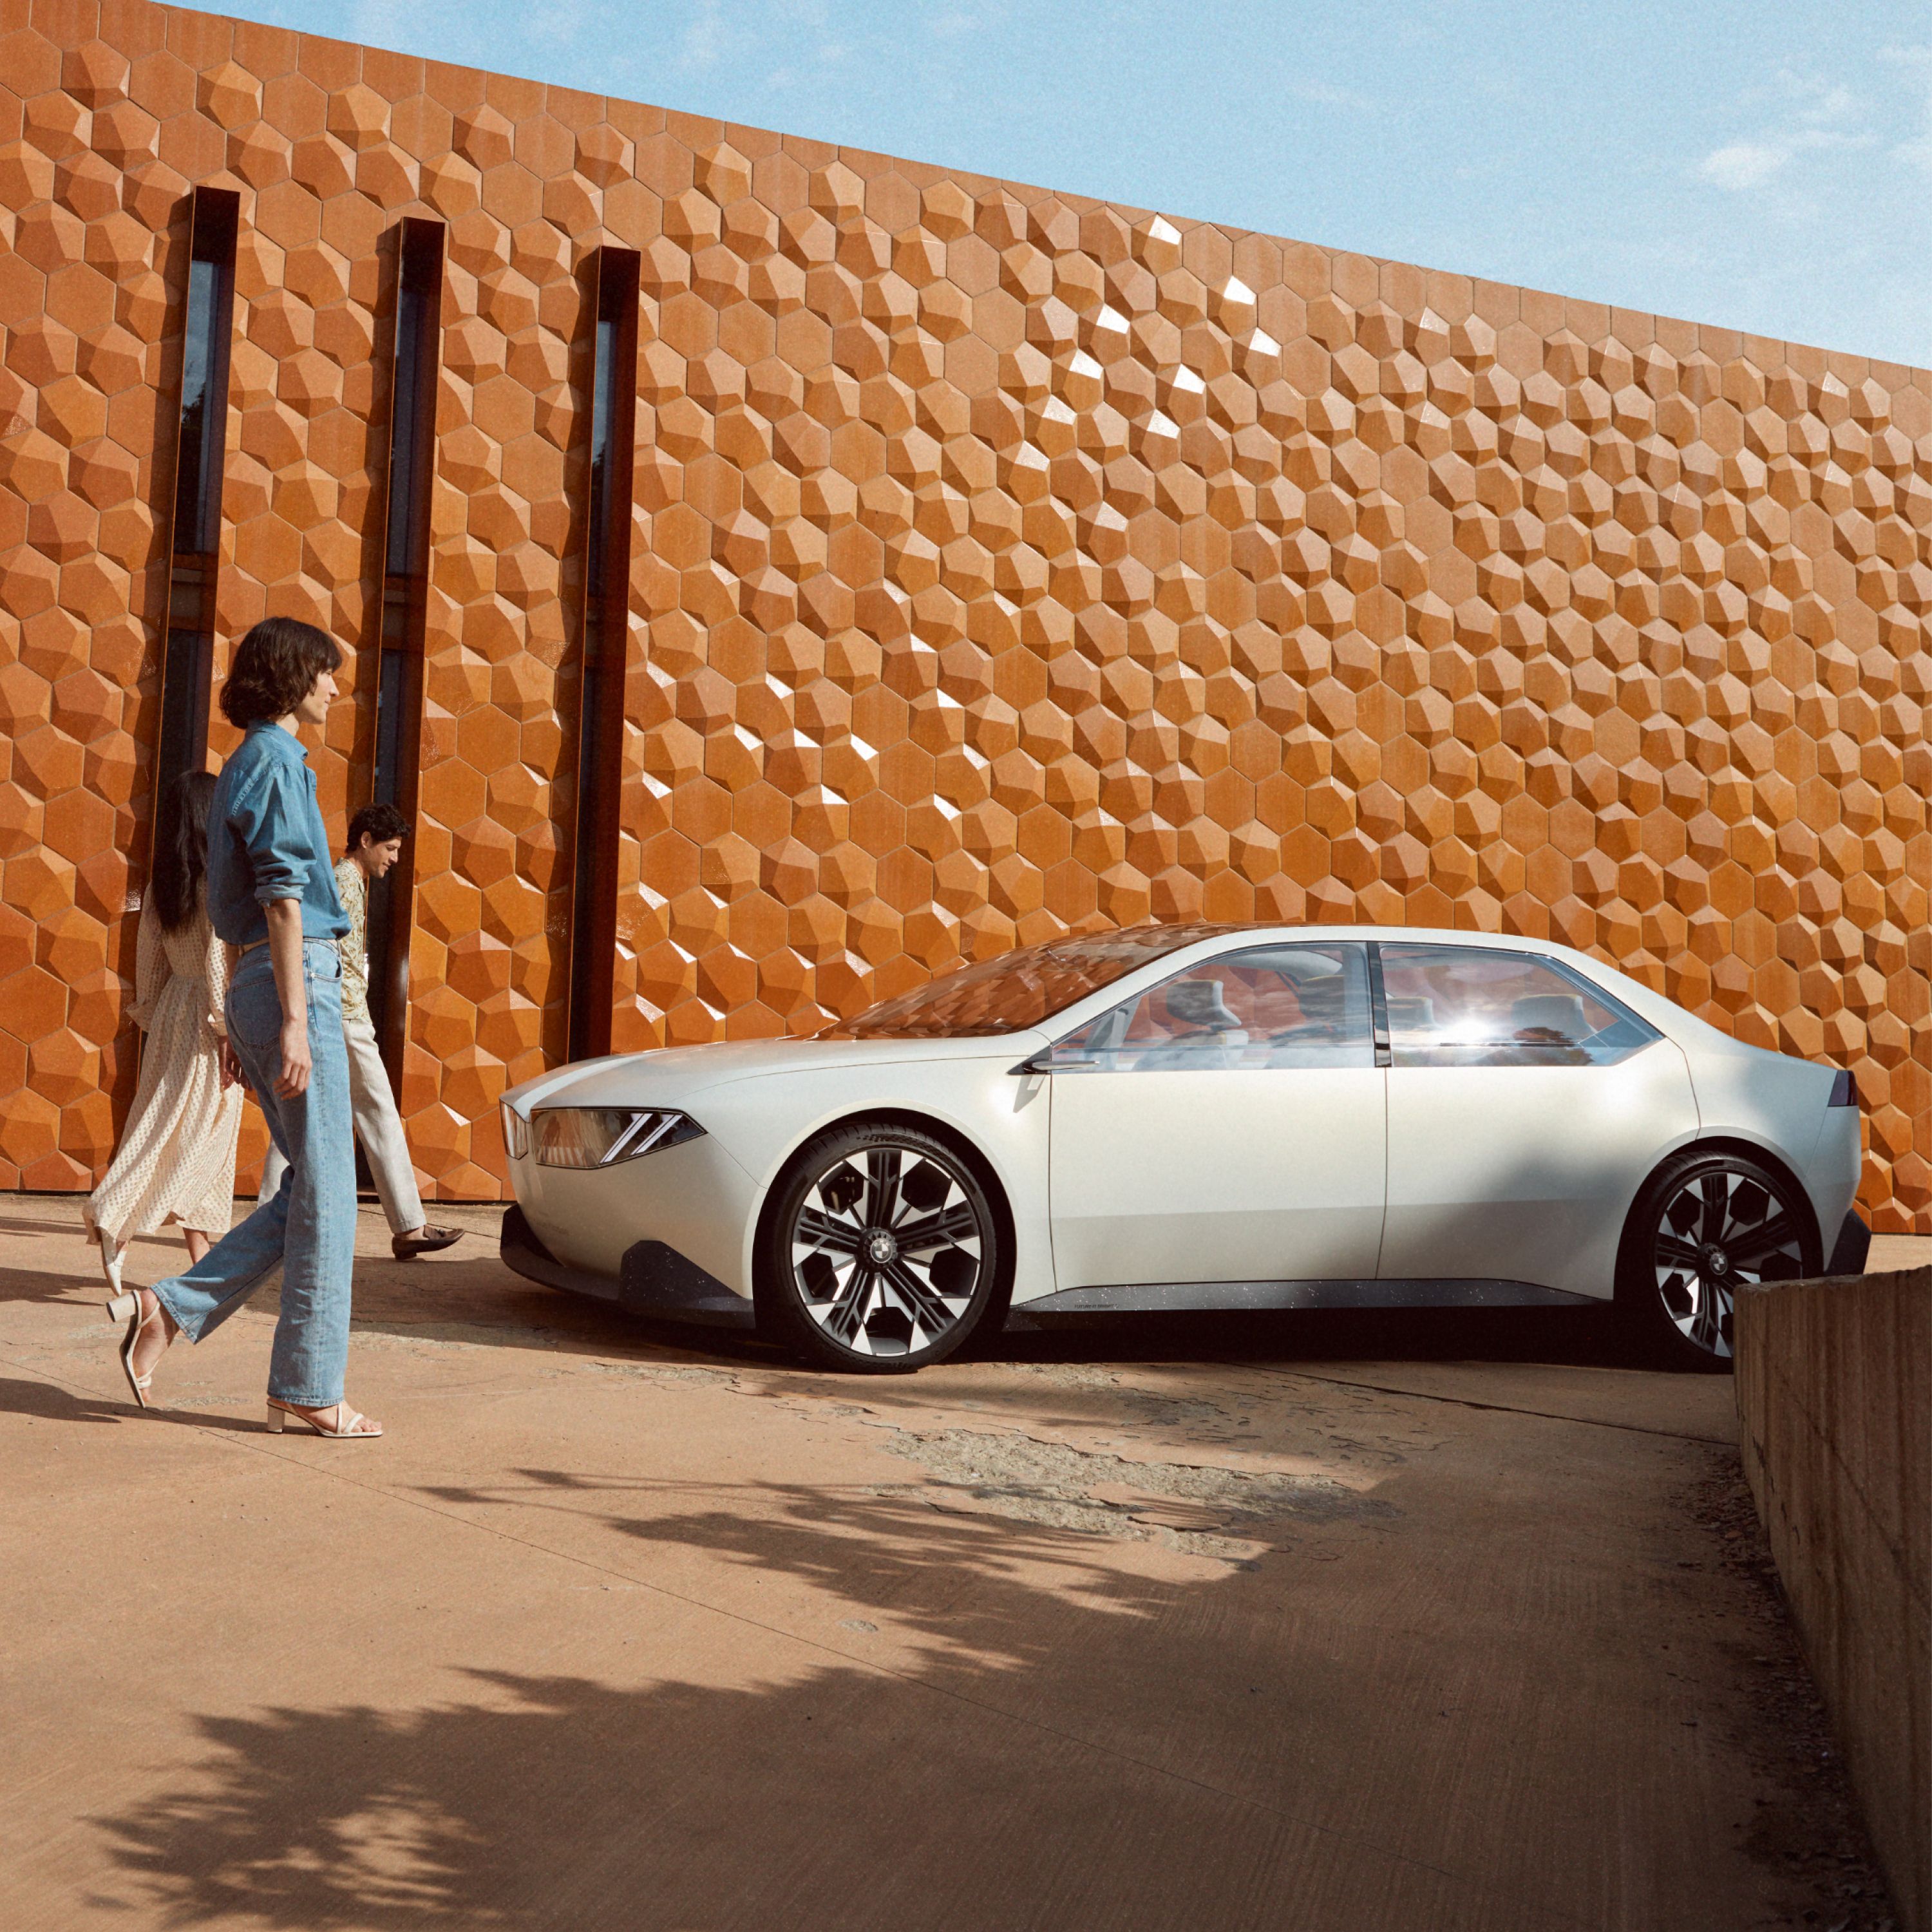 BMW Vision Neue Klasse concept car 2023 exterior 4/5 side view, parking in front of wall, with a woman